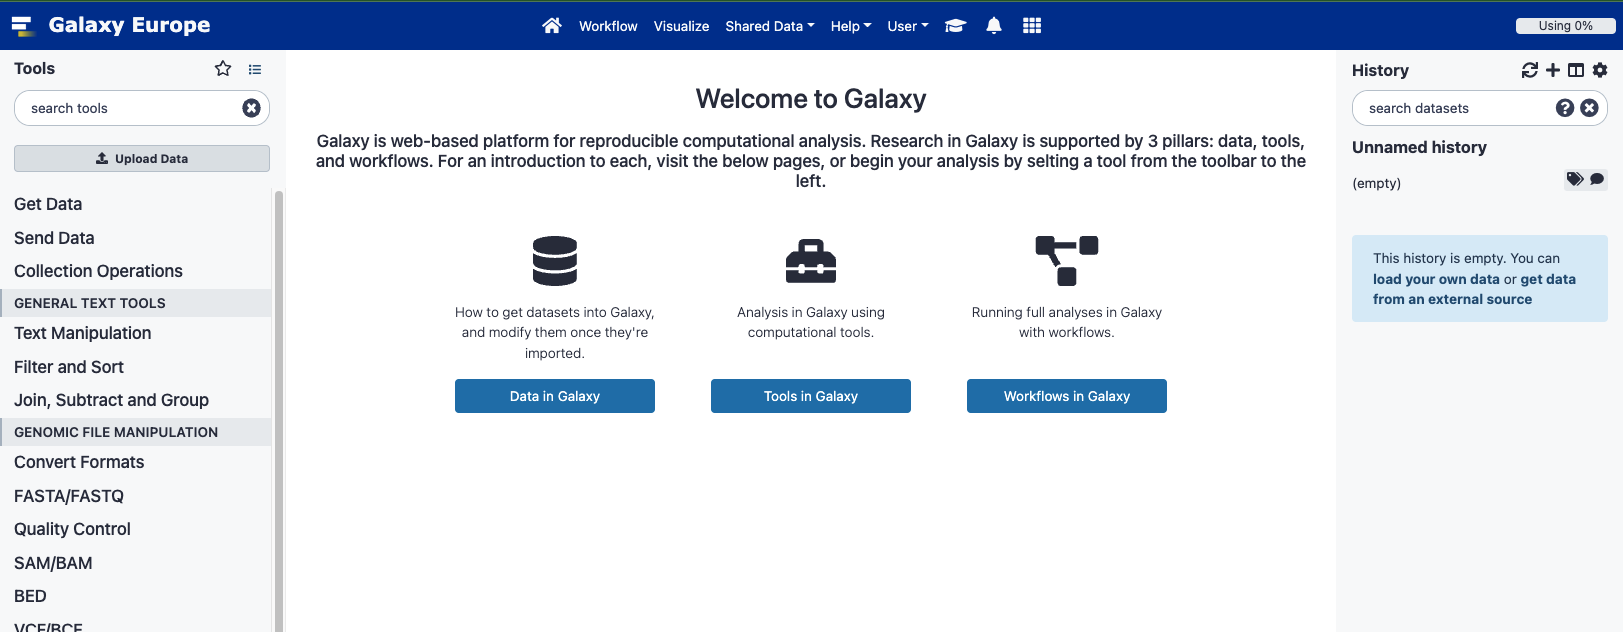 Screenshot of the Galaxy Welcome Page